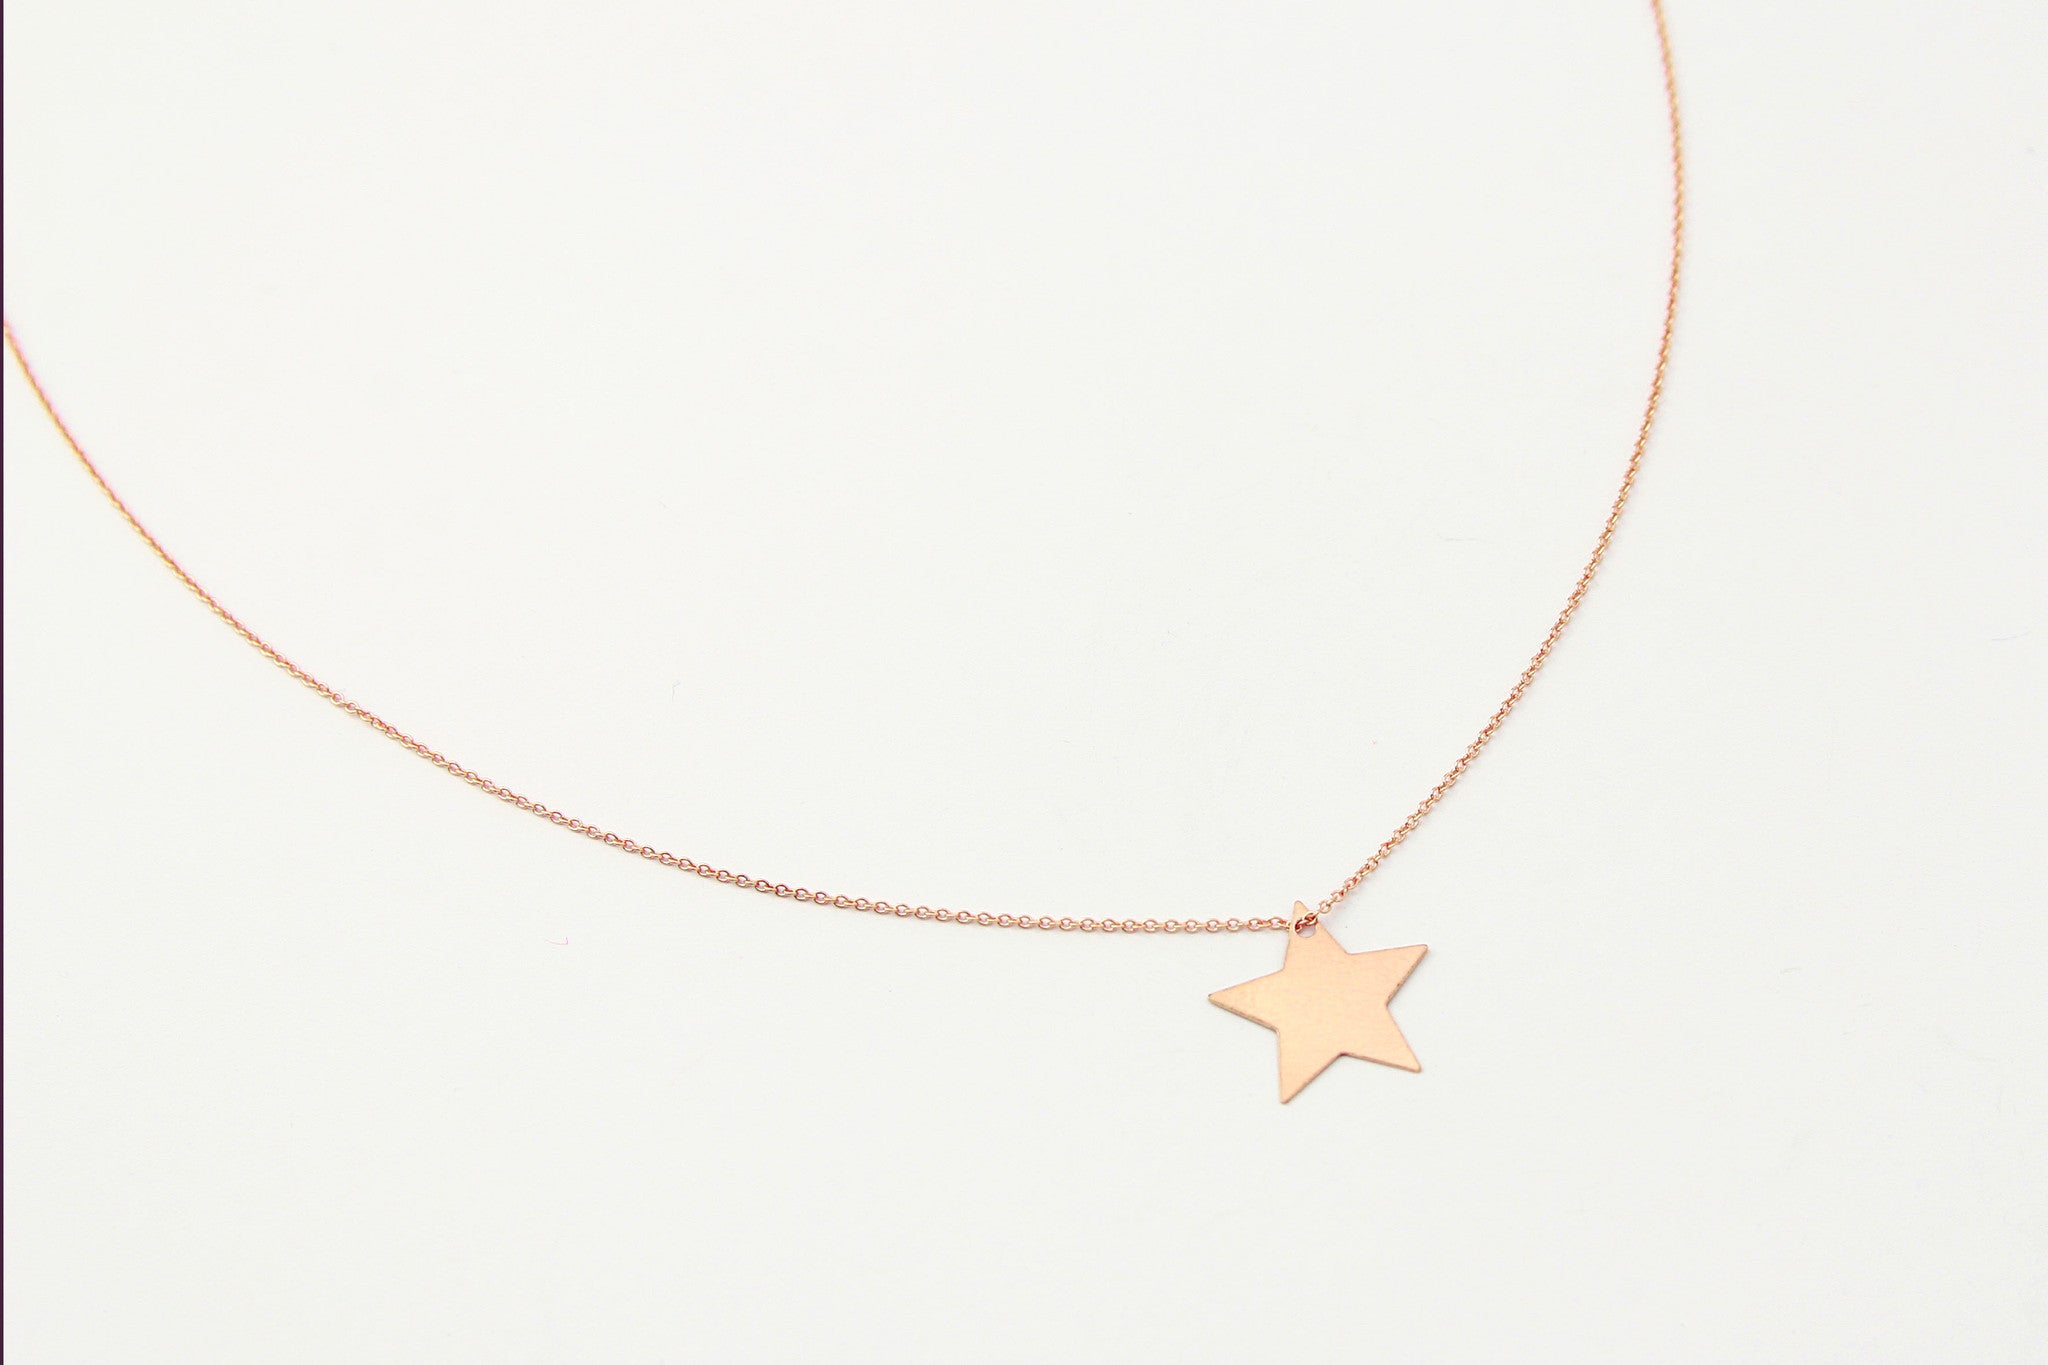 jewelberry  fine jewelry handmade with love fairtrade necklace kette plain star medium anchor chain rose gold plated sterling silver